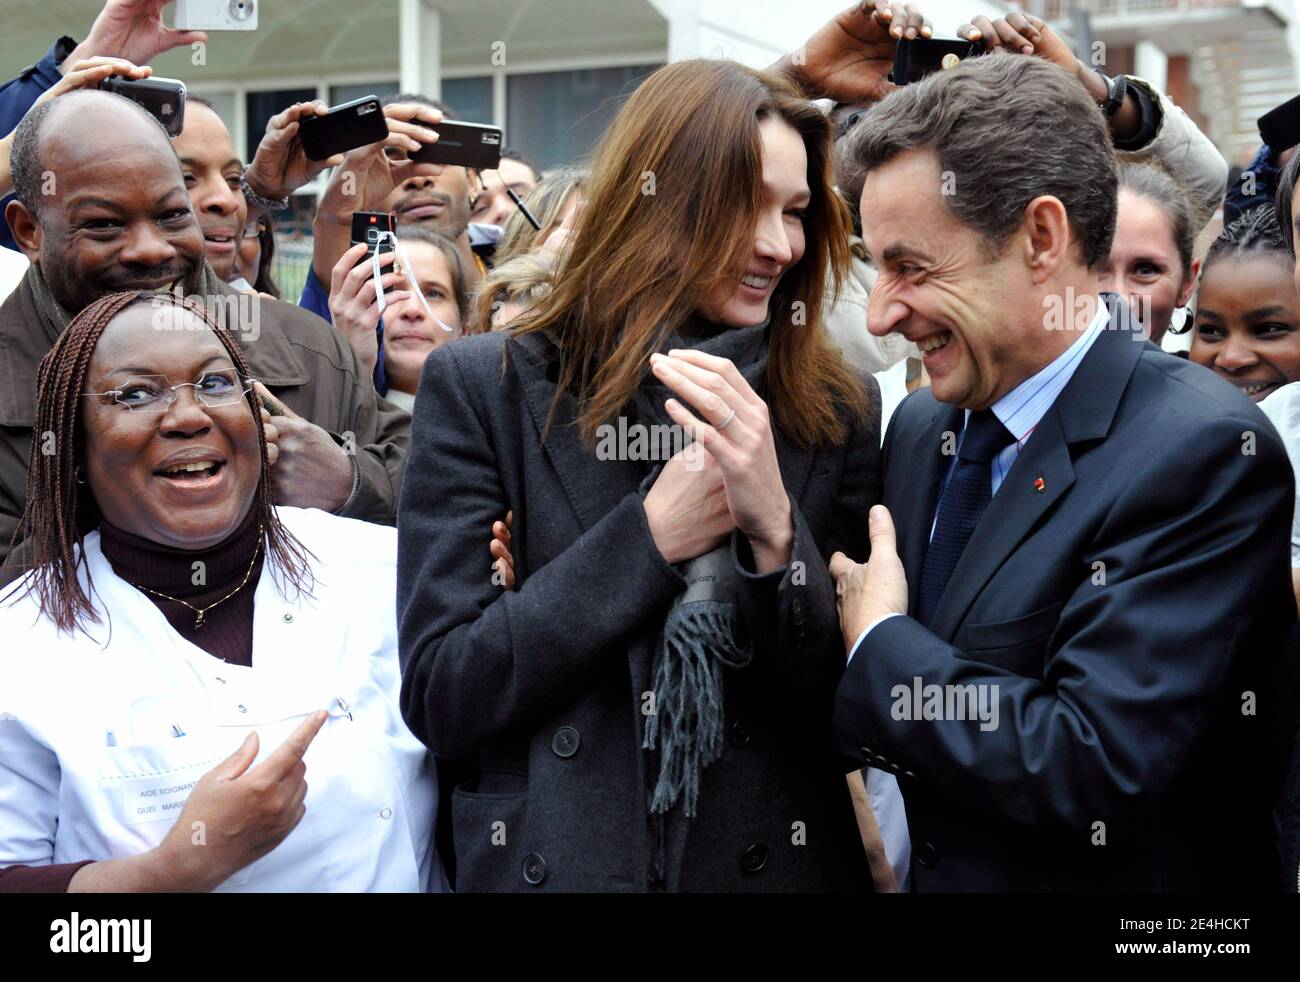 French President Nicolas Sarkozy (C) and French First Lady Carla Bruni-Sarkozy (C) pose after visiting a hospital in Creteil, near Paris France on December 22, 2009. Photo by Gerard Cerles/Pool/ABACAPRESS.COM Stock Photo